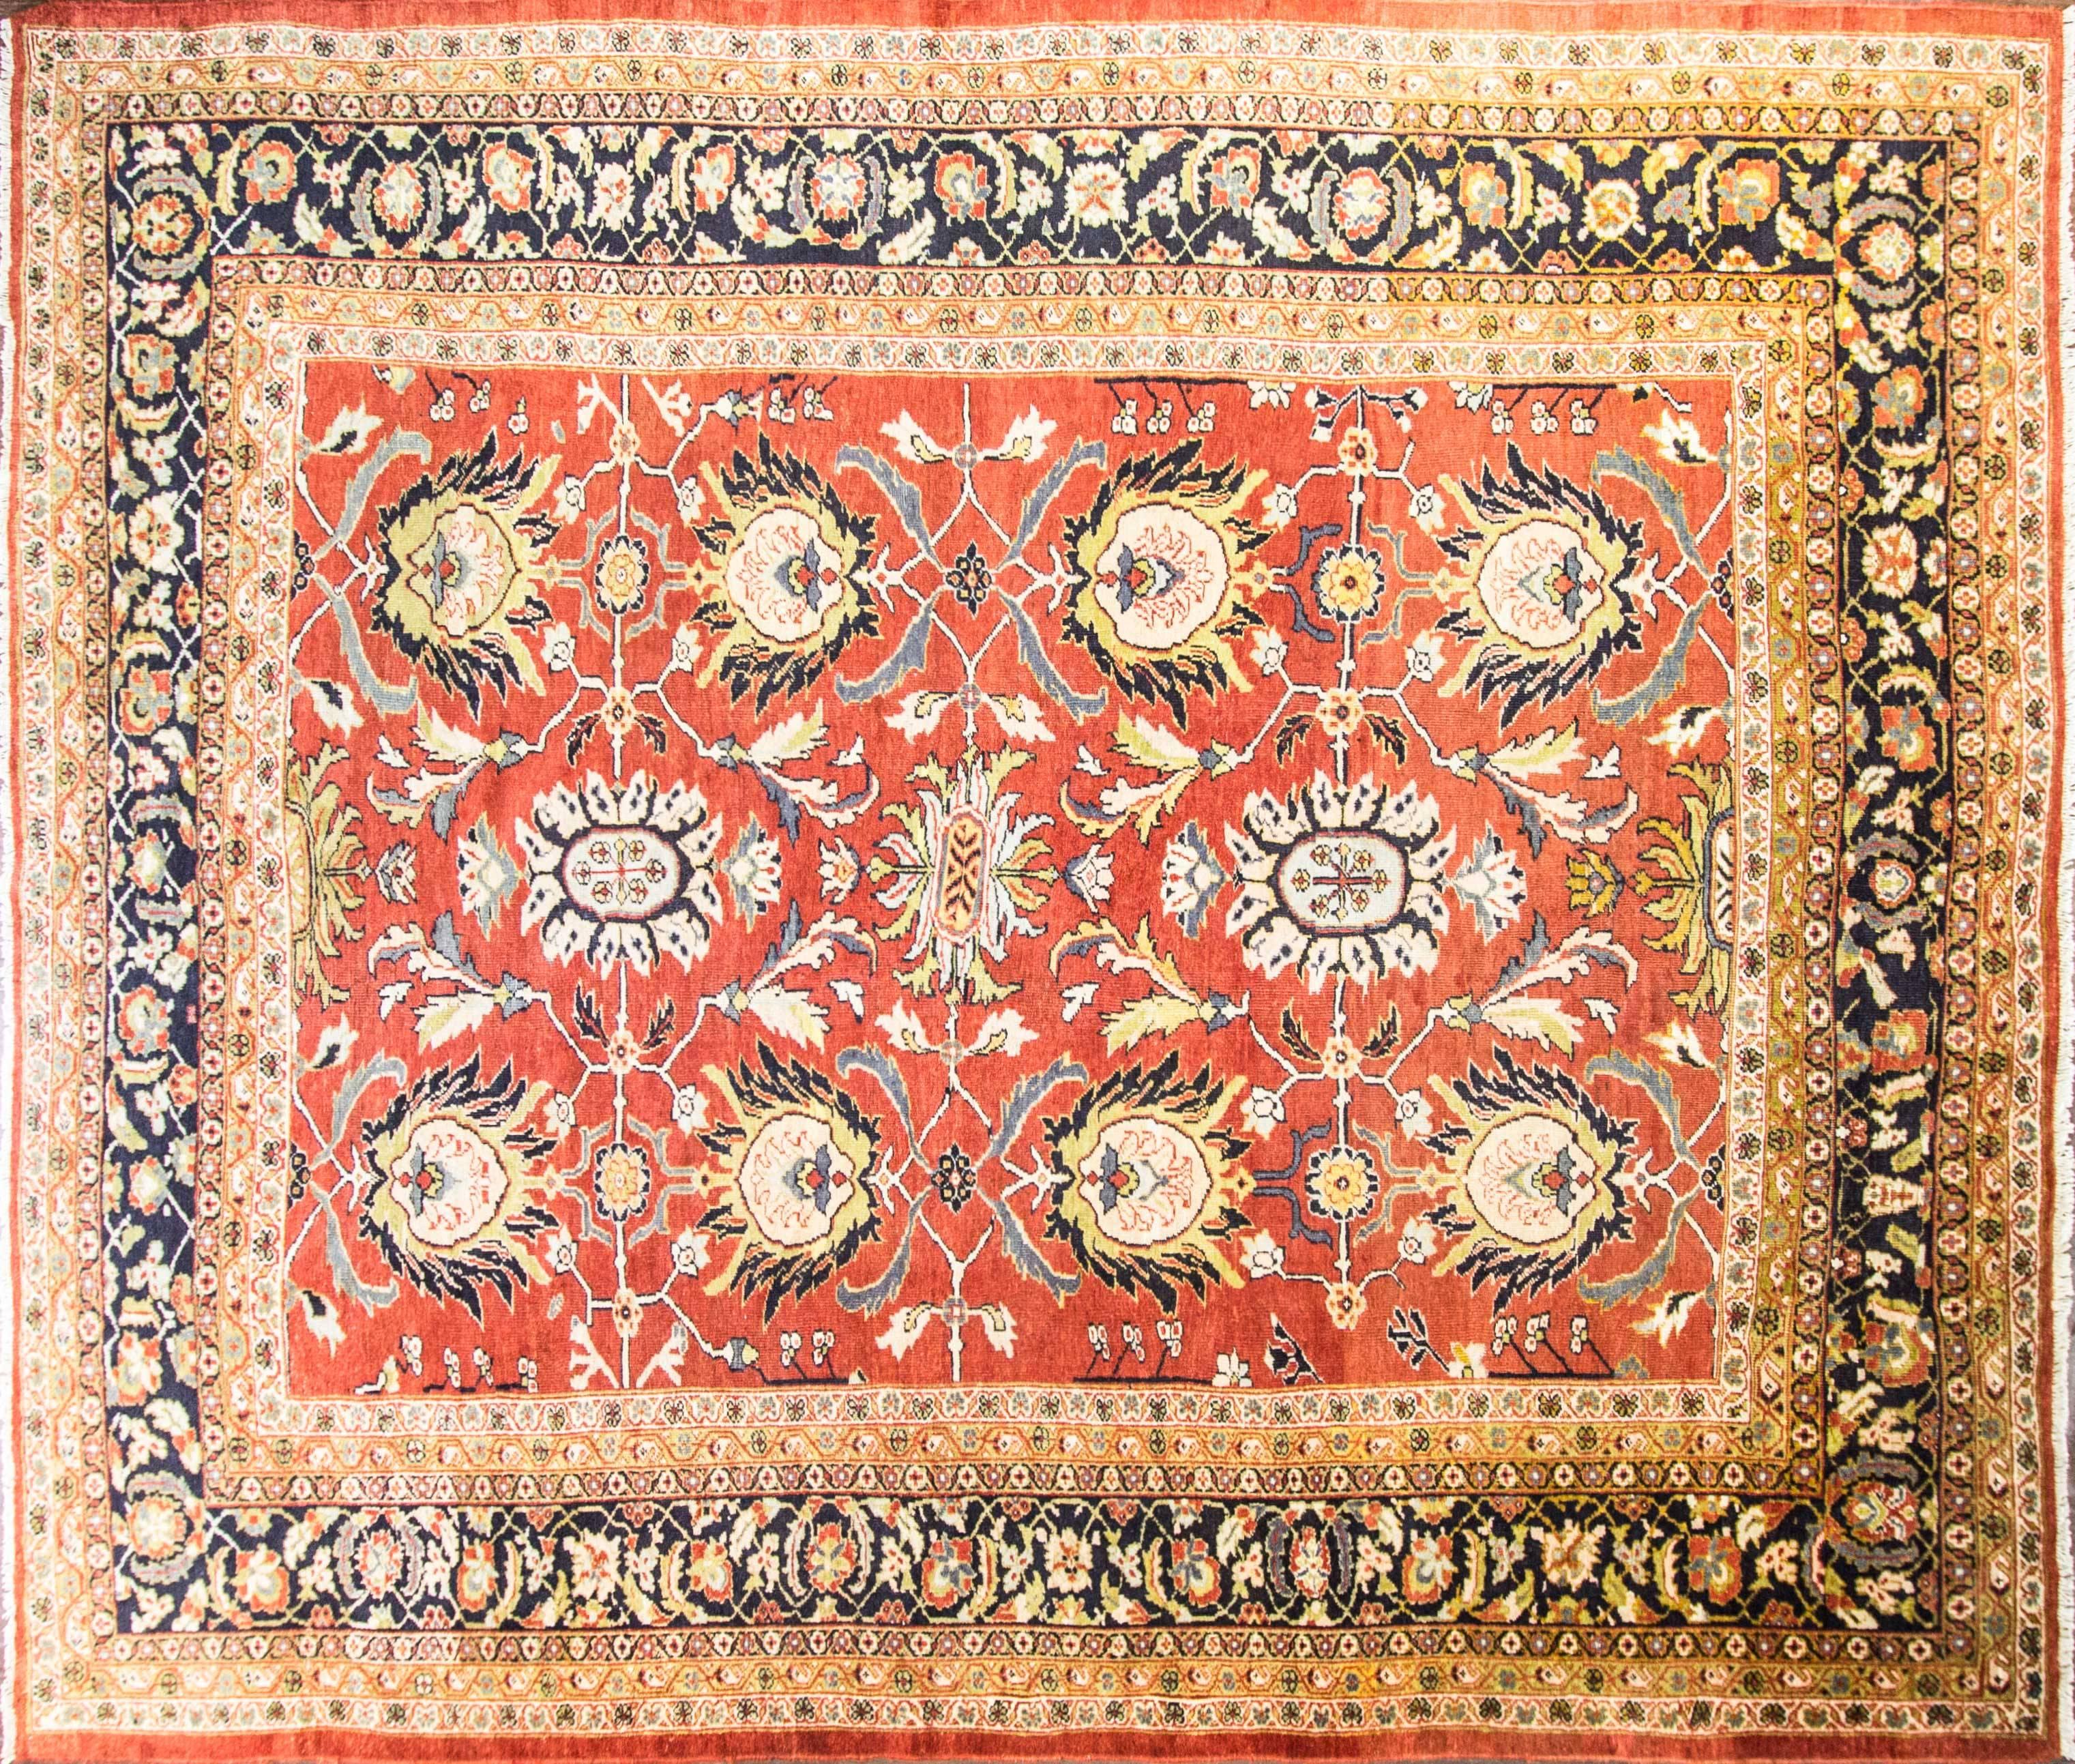 Stunning antique Sultanabad carpet:
 The city of Sultanabad was founded, in the early 1800s, as a center for commercial rug production in Iran. During the late 19th century, the firm of Hotz and Son and Ziegler and Co. established a manufactory in